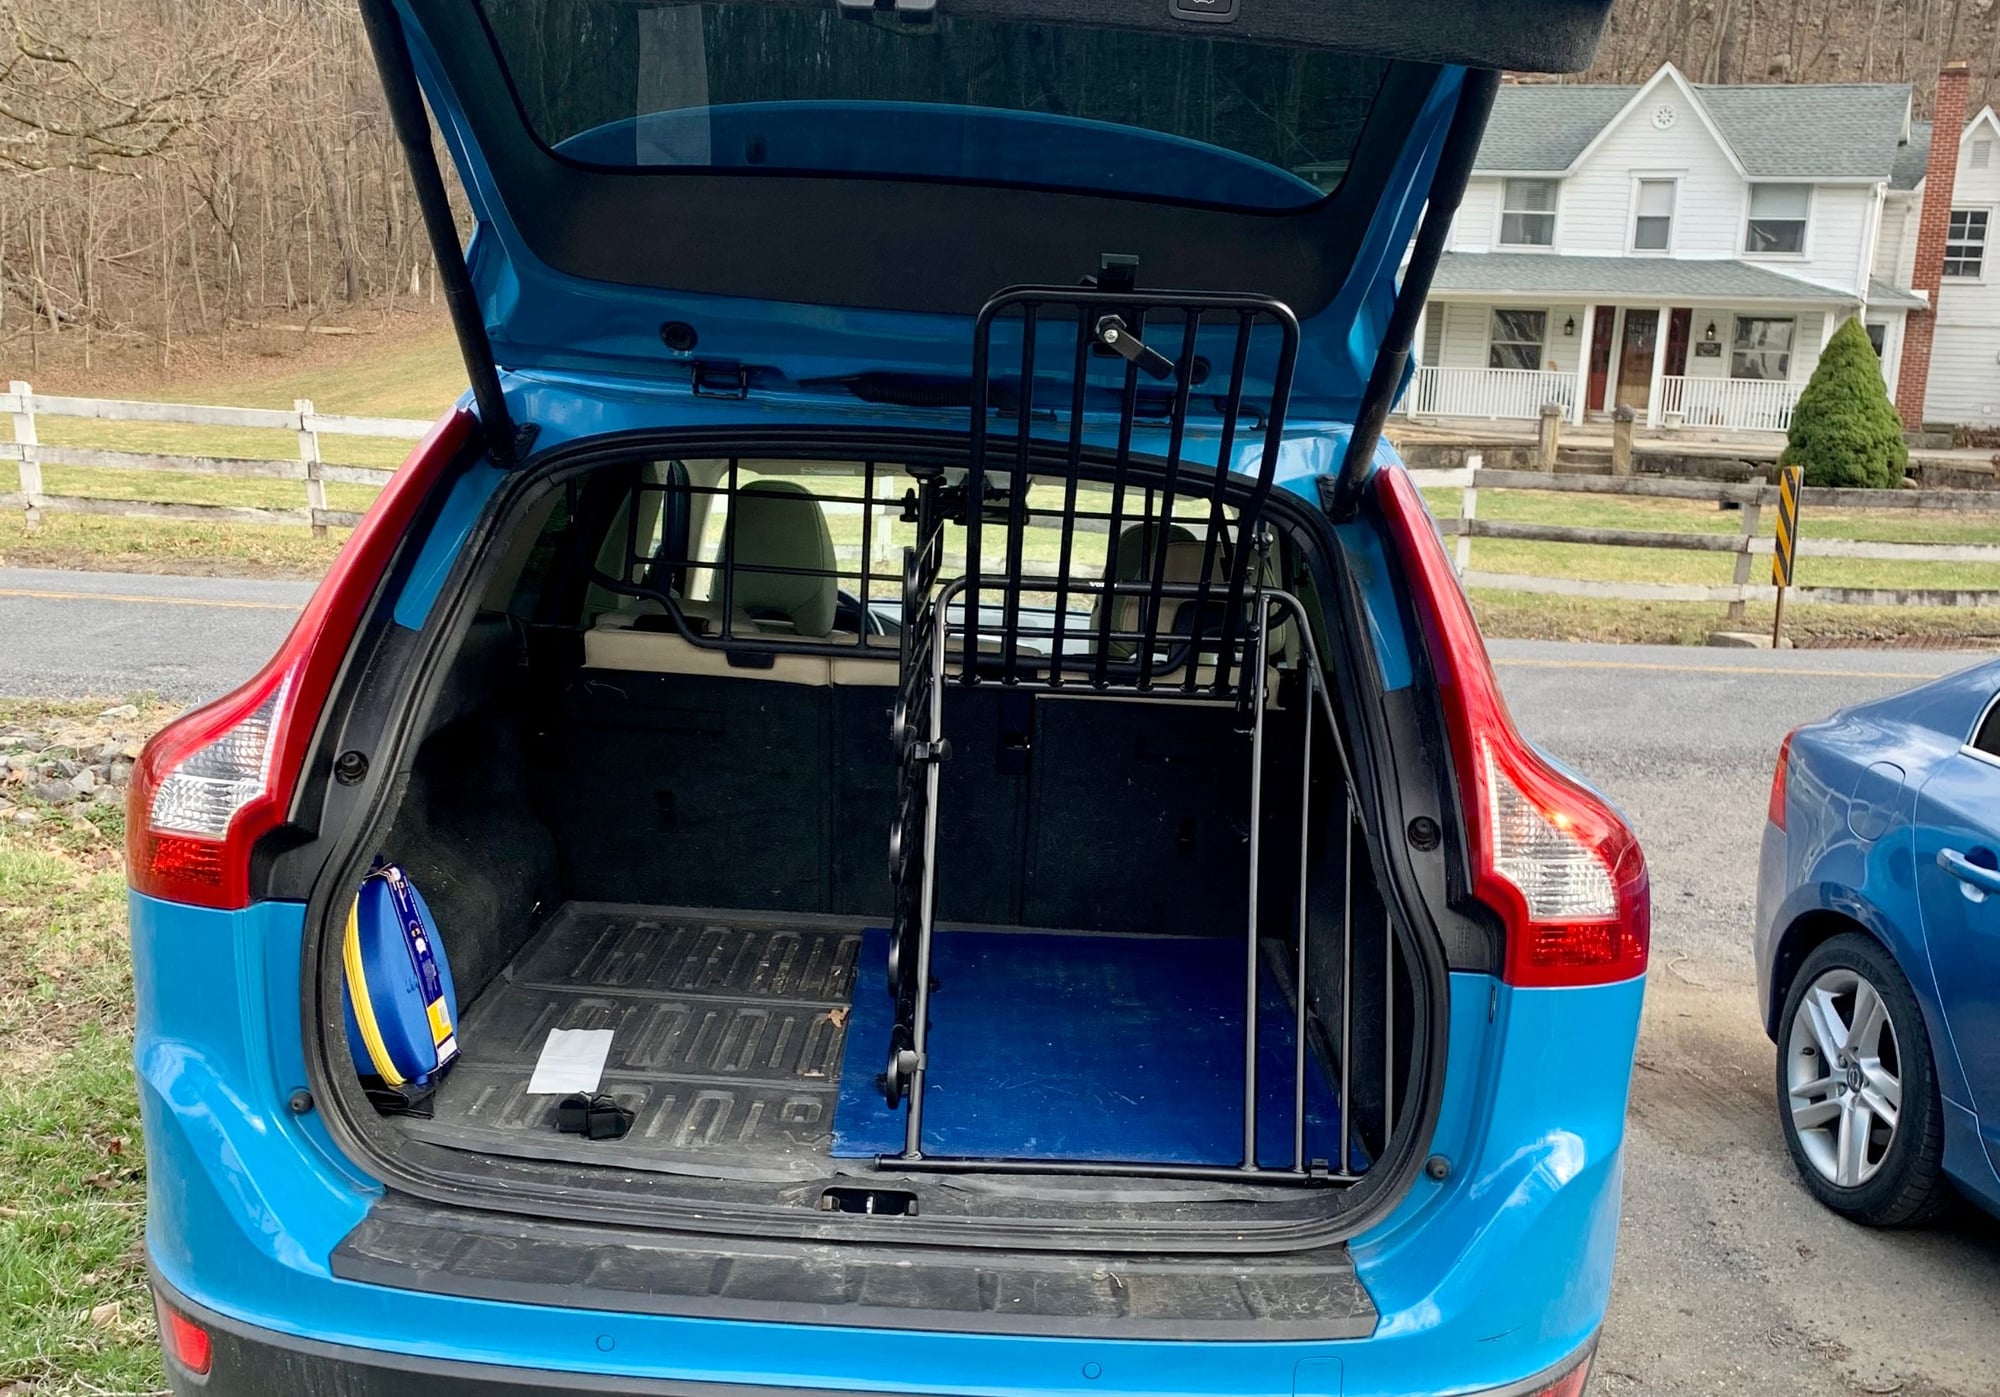 Accessories - Dog gate and cargo divider for Volvo XC60. Fits model years 2012-2017 - Used - 2012 to 2017 Volvo XC60 - Cresaptown, MD 21502, United States